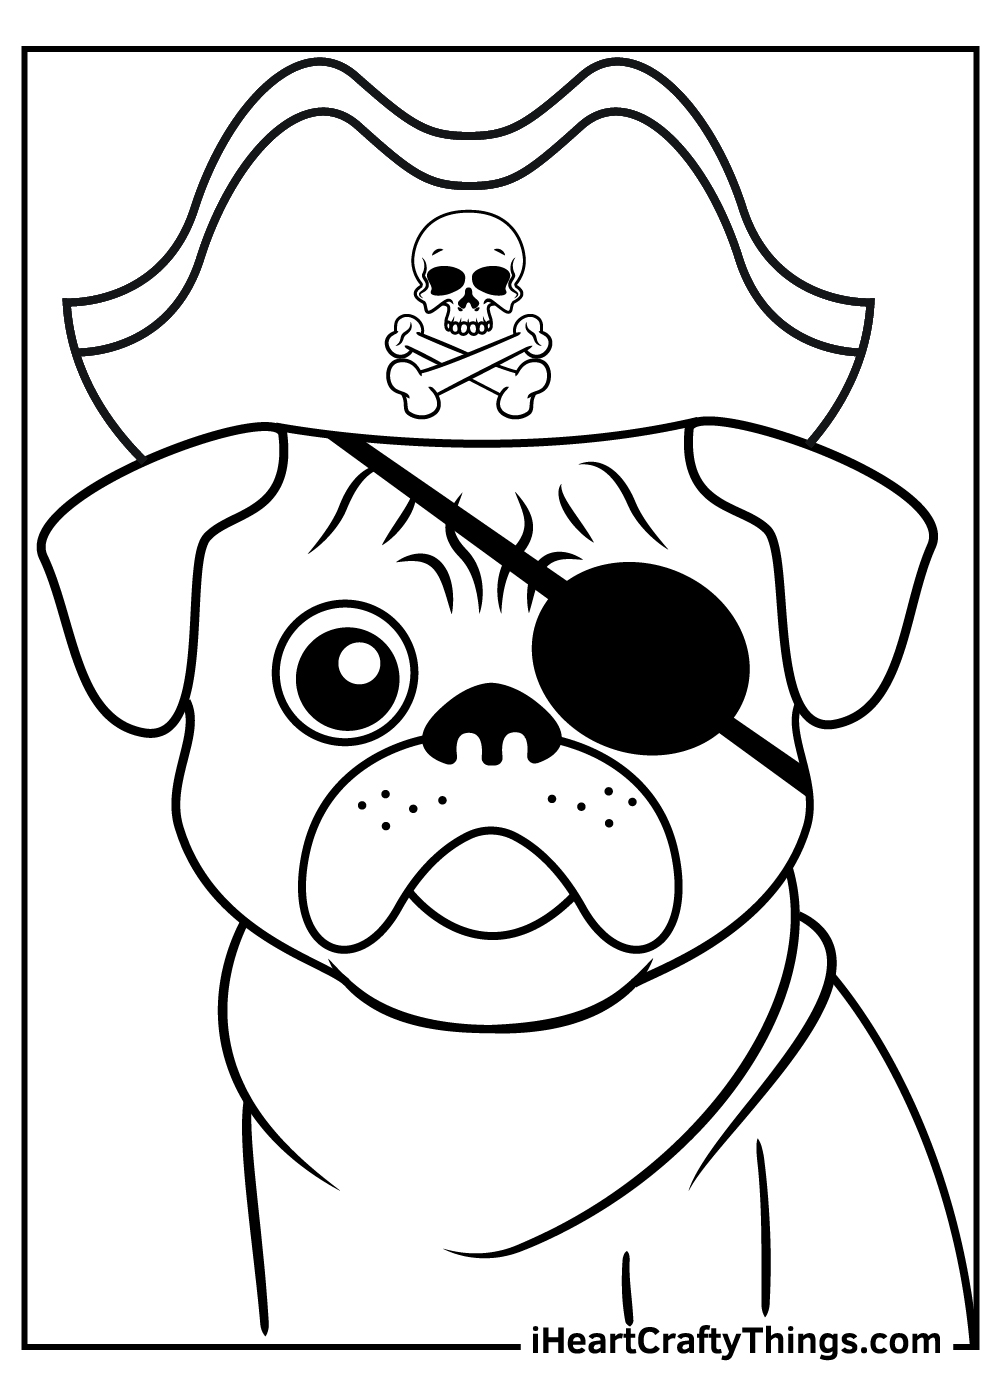 Pug coloring pages free printables